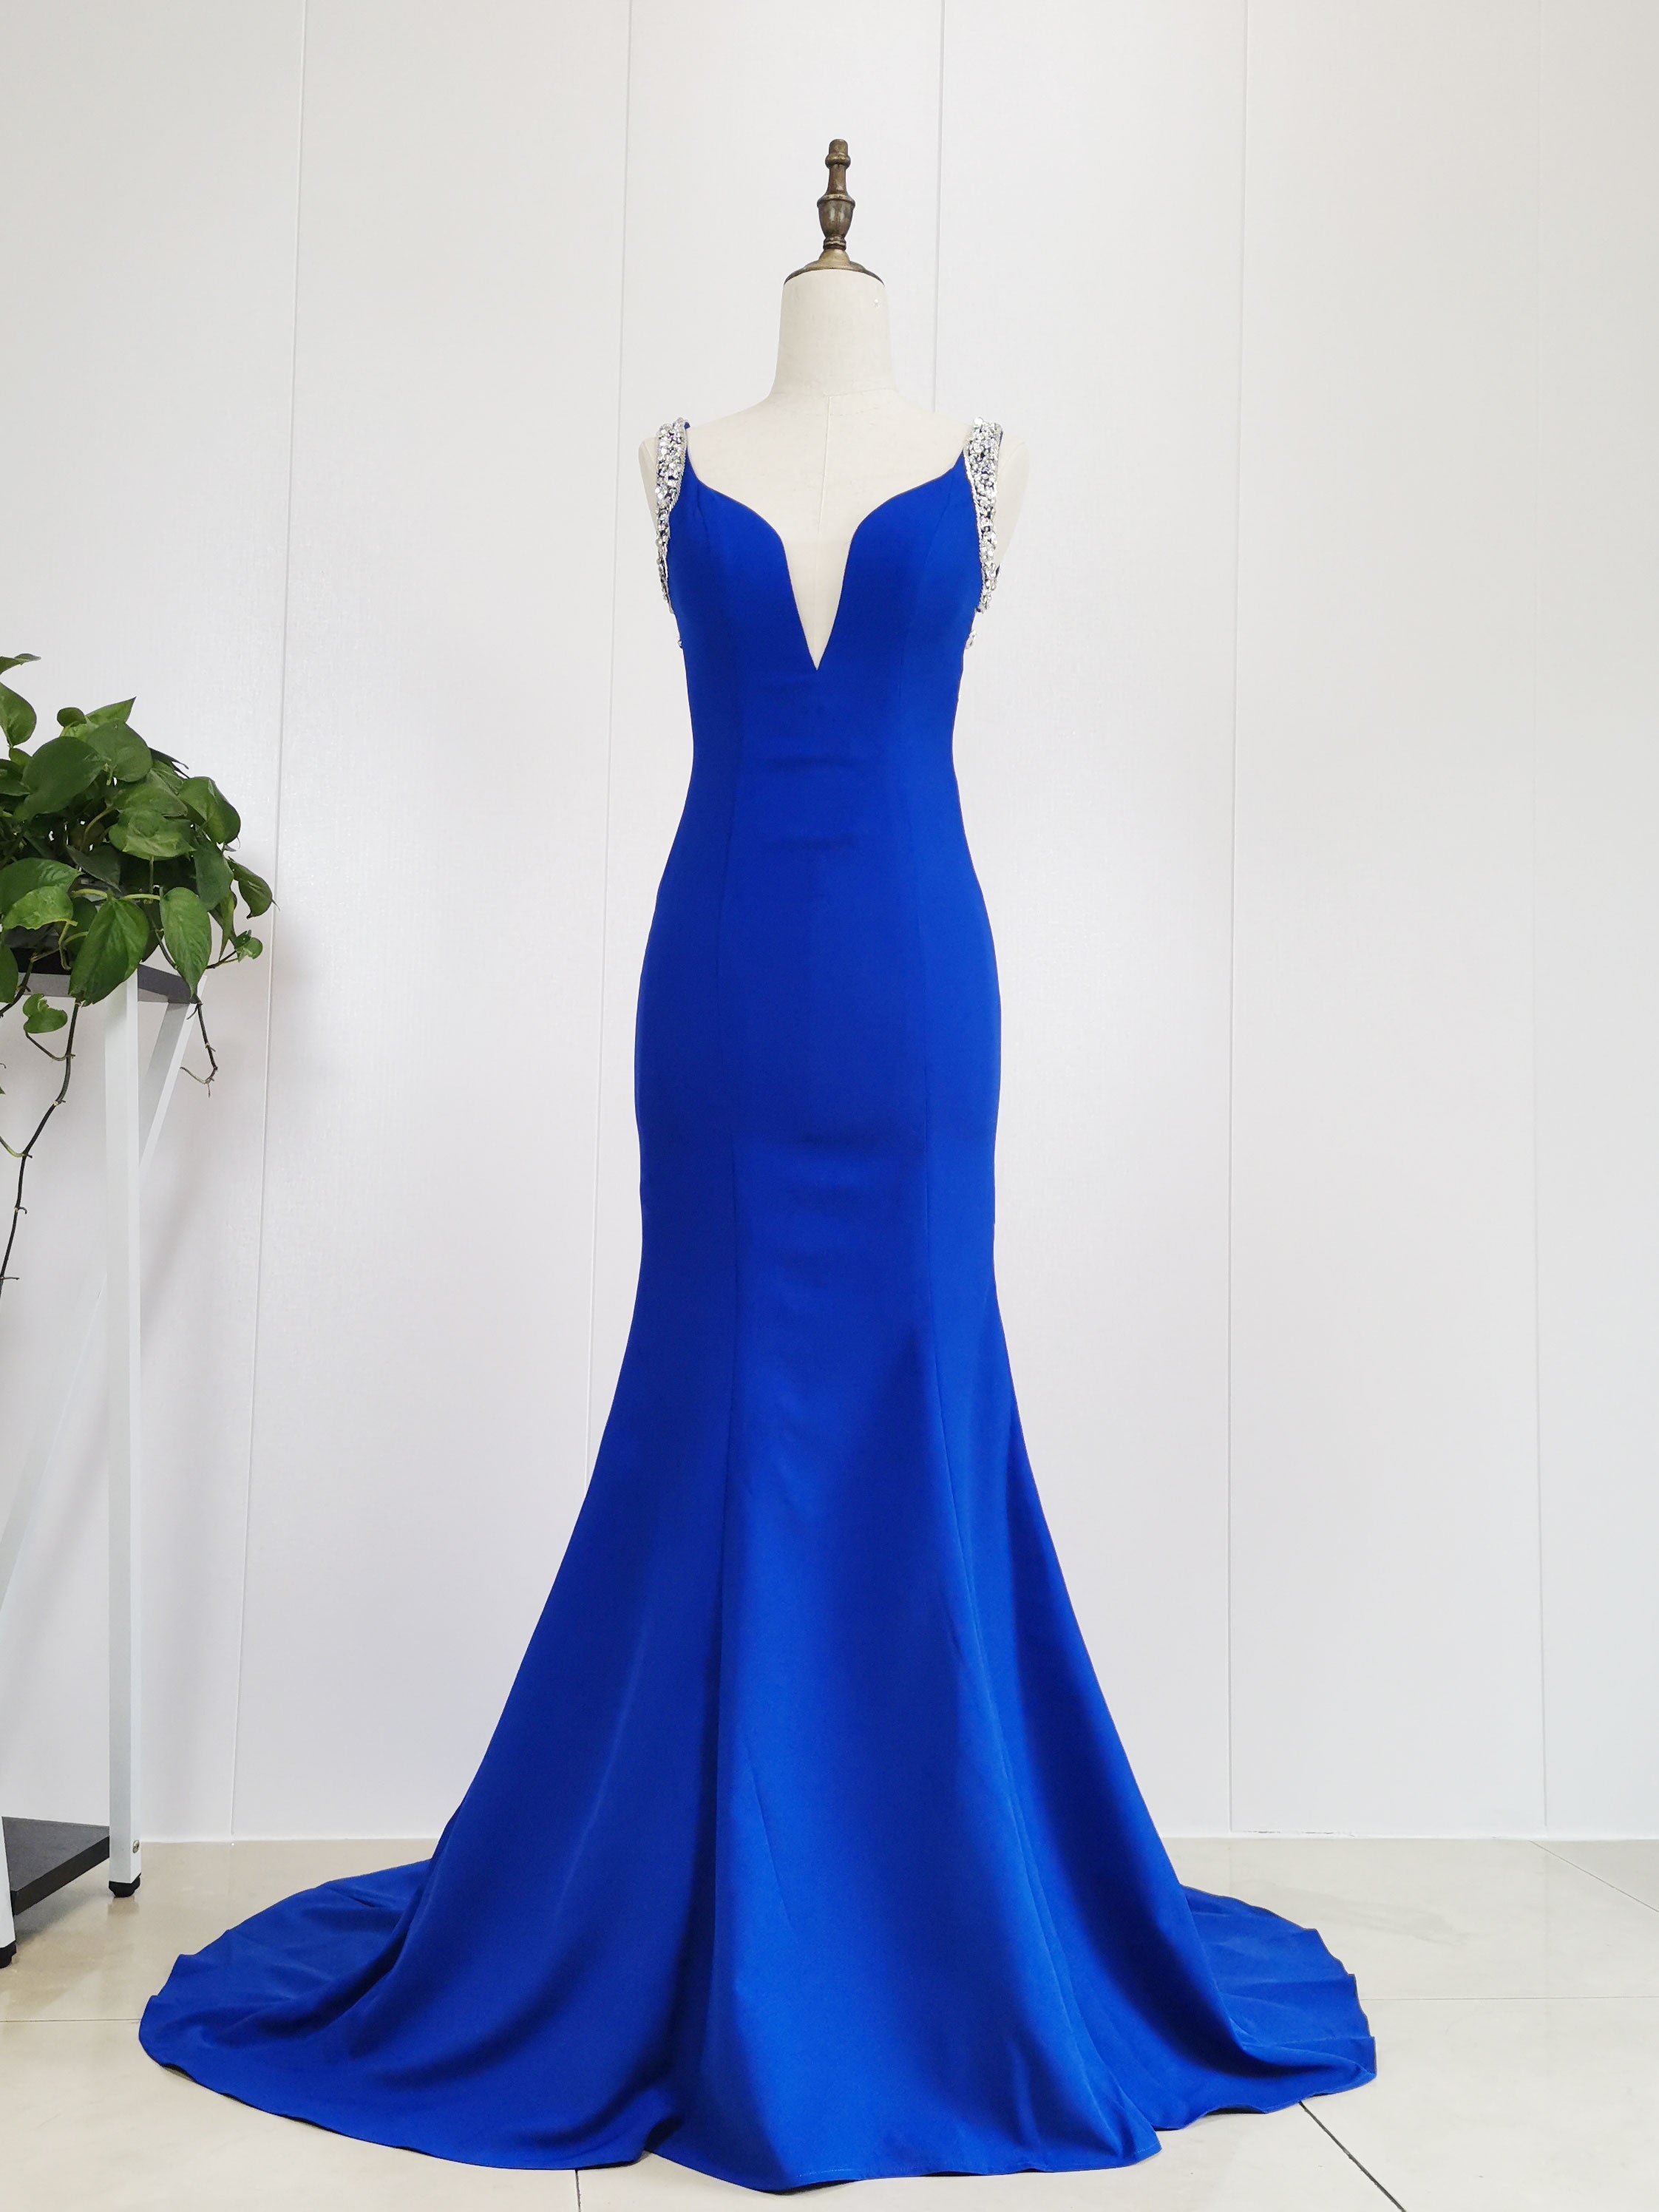 Blue Satin Beads Long Mermaid Prom Dress Outfits For Women Blue Formal Dress